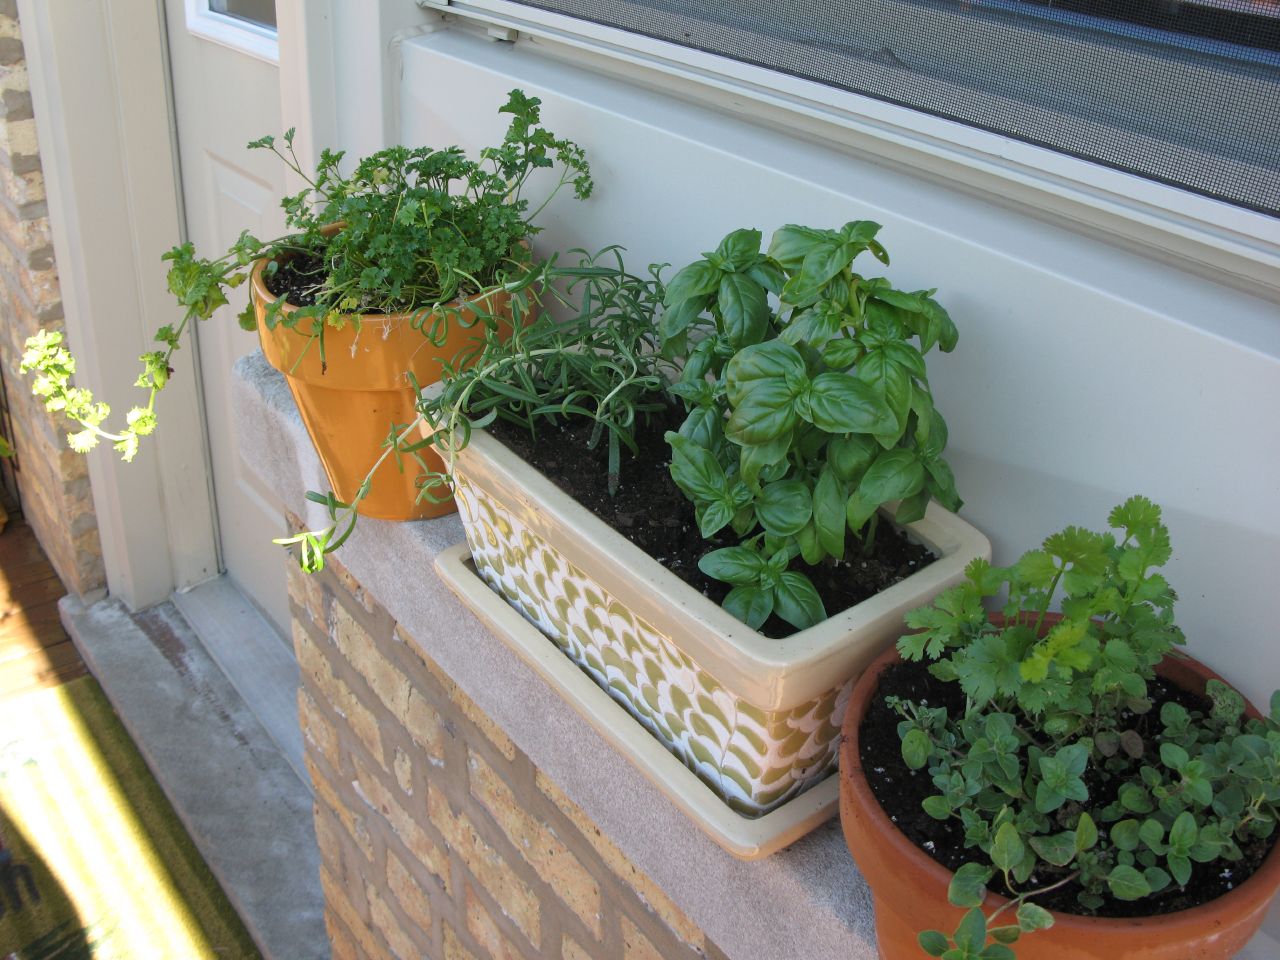 pots of herbs and herbs planted in their own containers